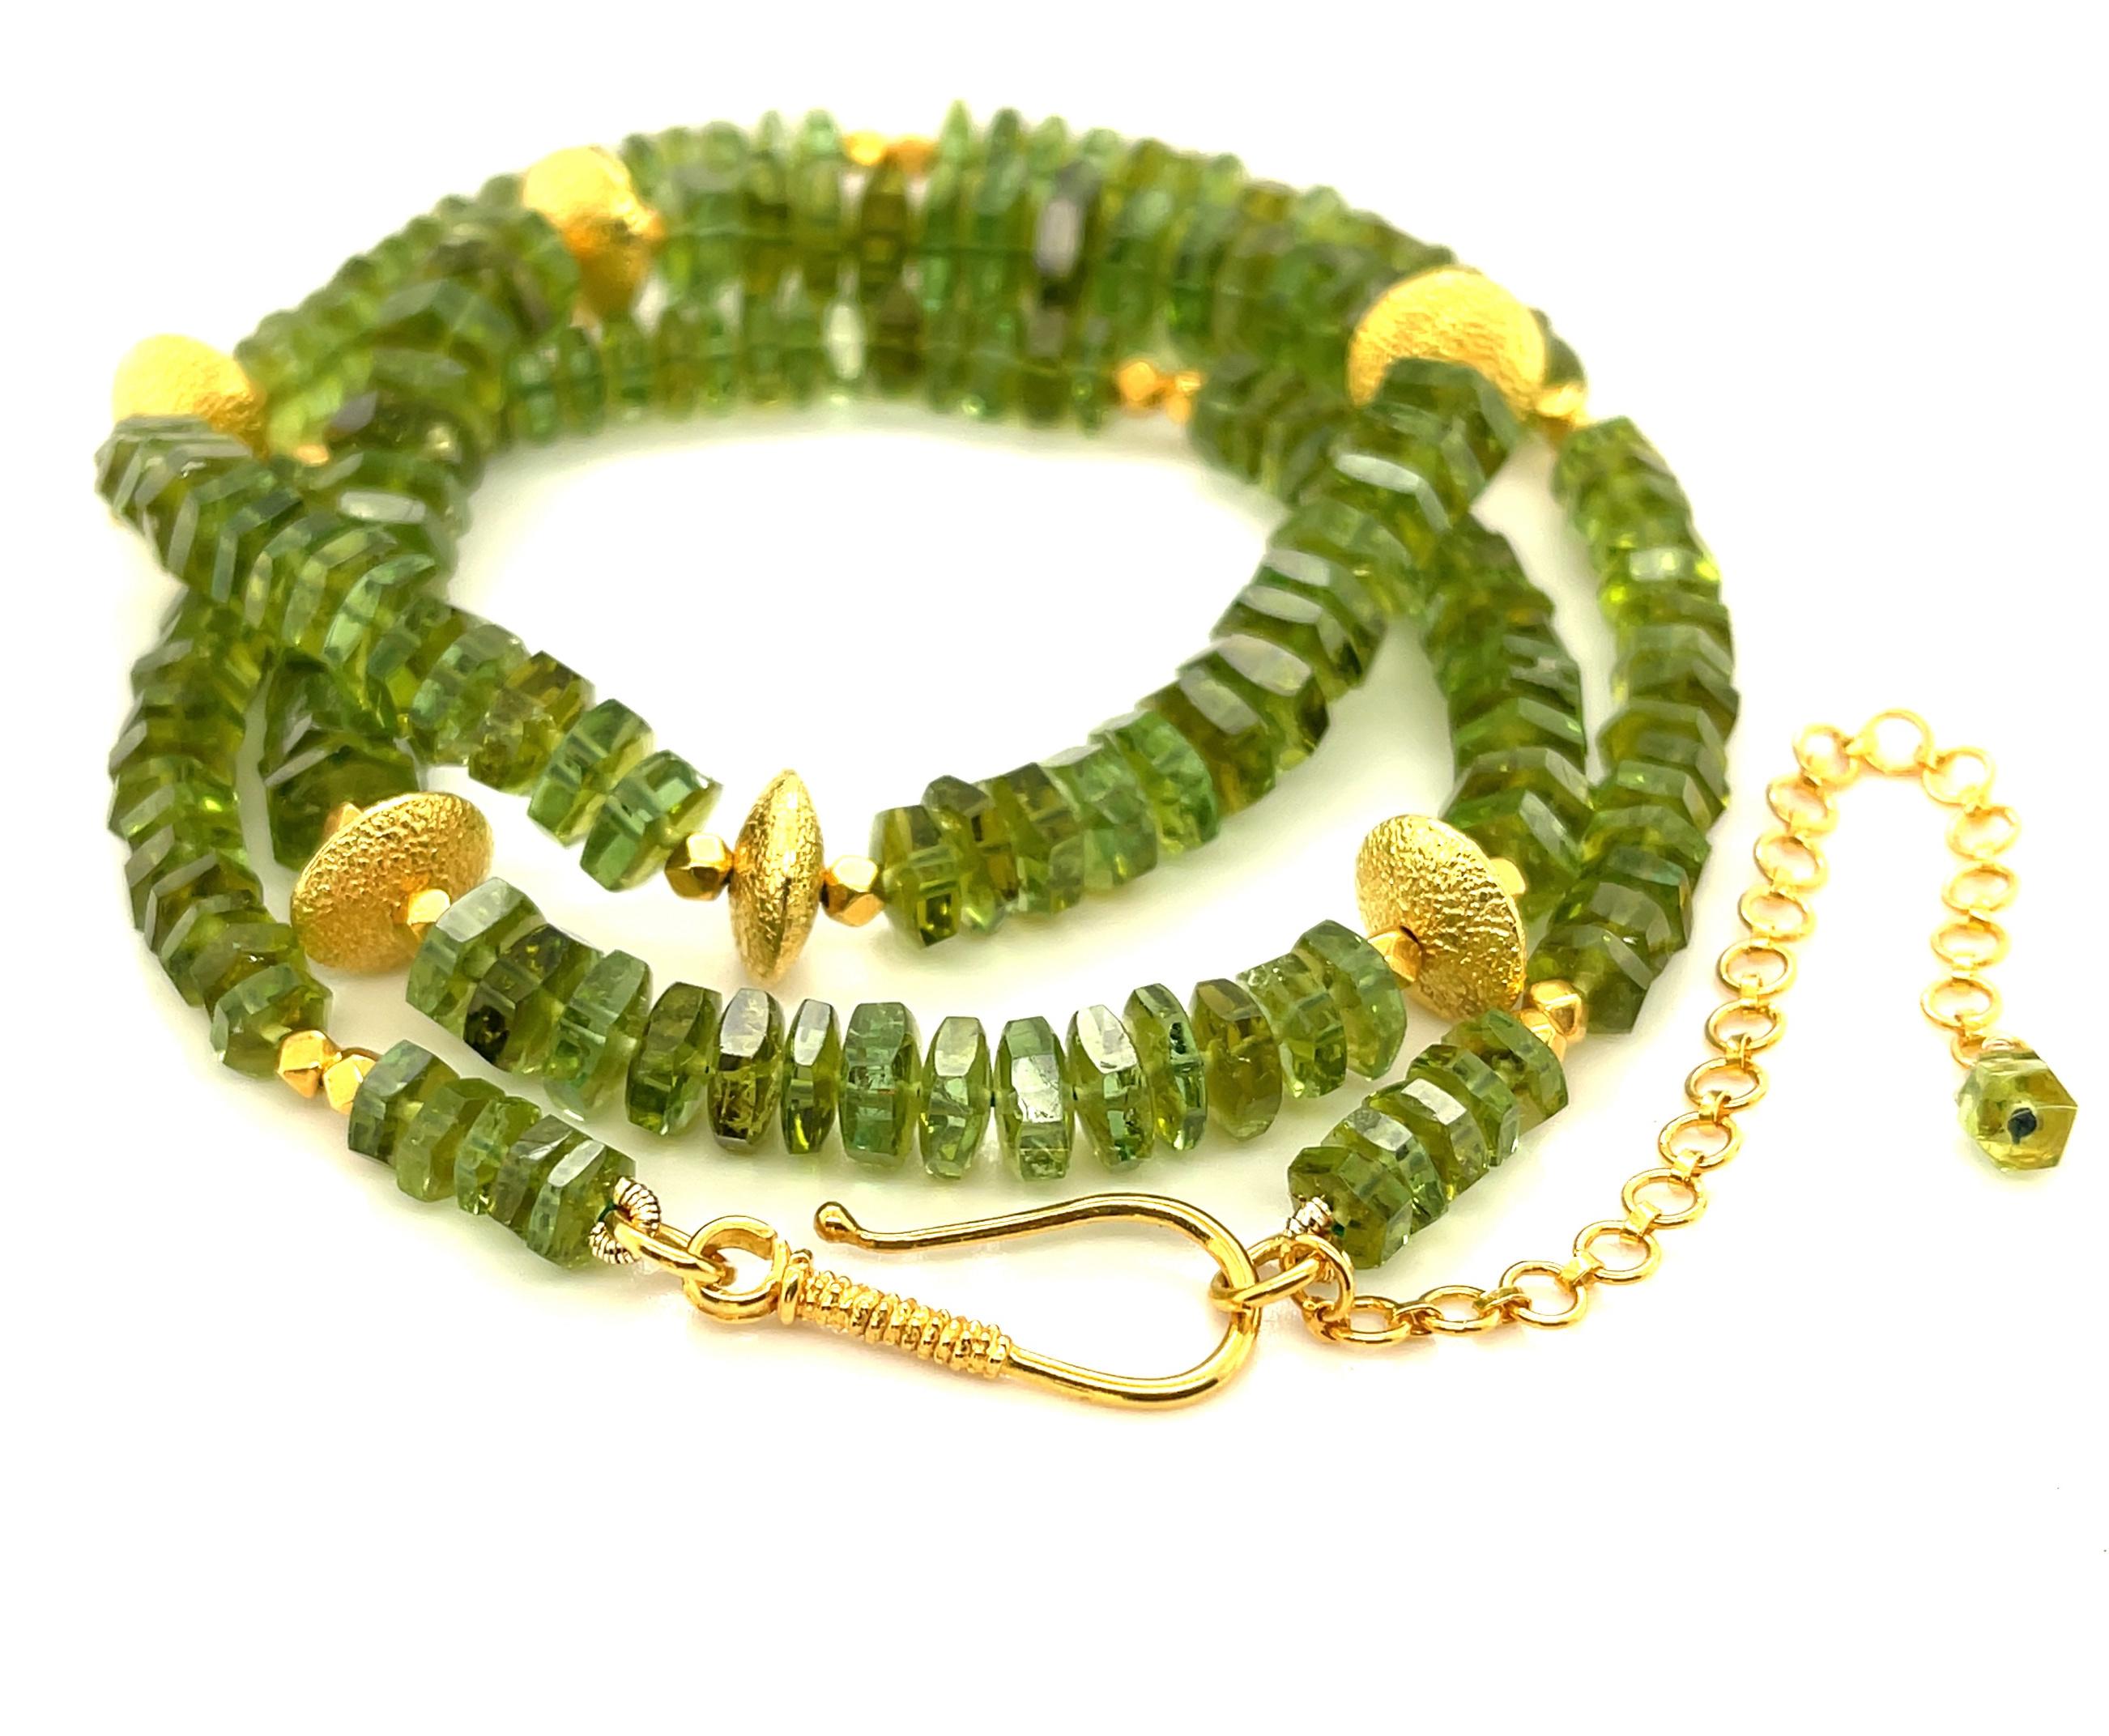 This strand of graduated green tourmaline beads is so pretty and unusual! The tourmaline gems graduate in size from 5.5 to 8.5mm in diameter and have been faceted as rondels that sparkle and catch the light, showing off their beautiful leaf-green